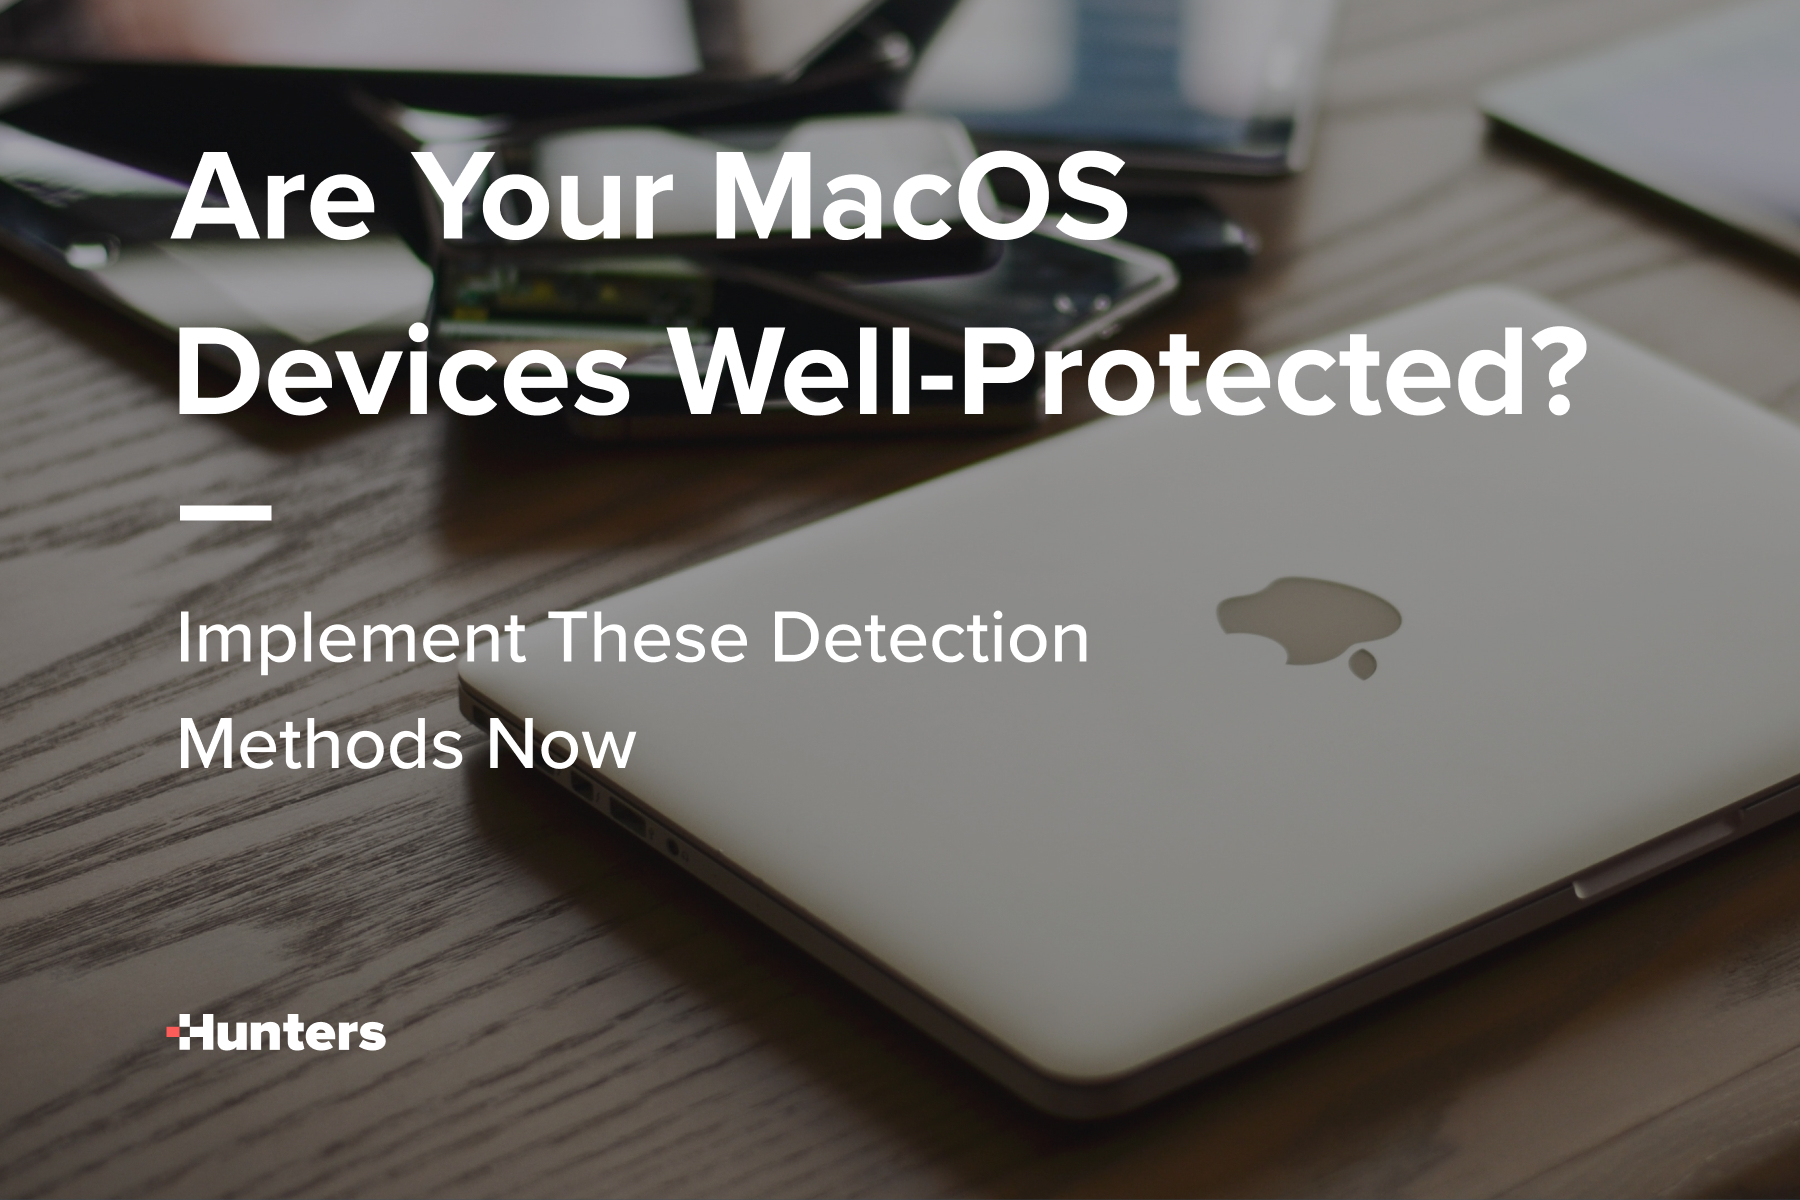 Are Your macOS Devices Well-Protected? Implement These Detection Methods Now